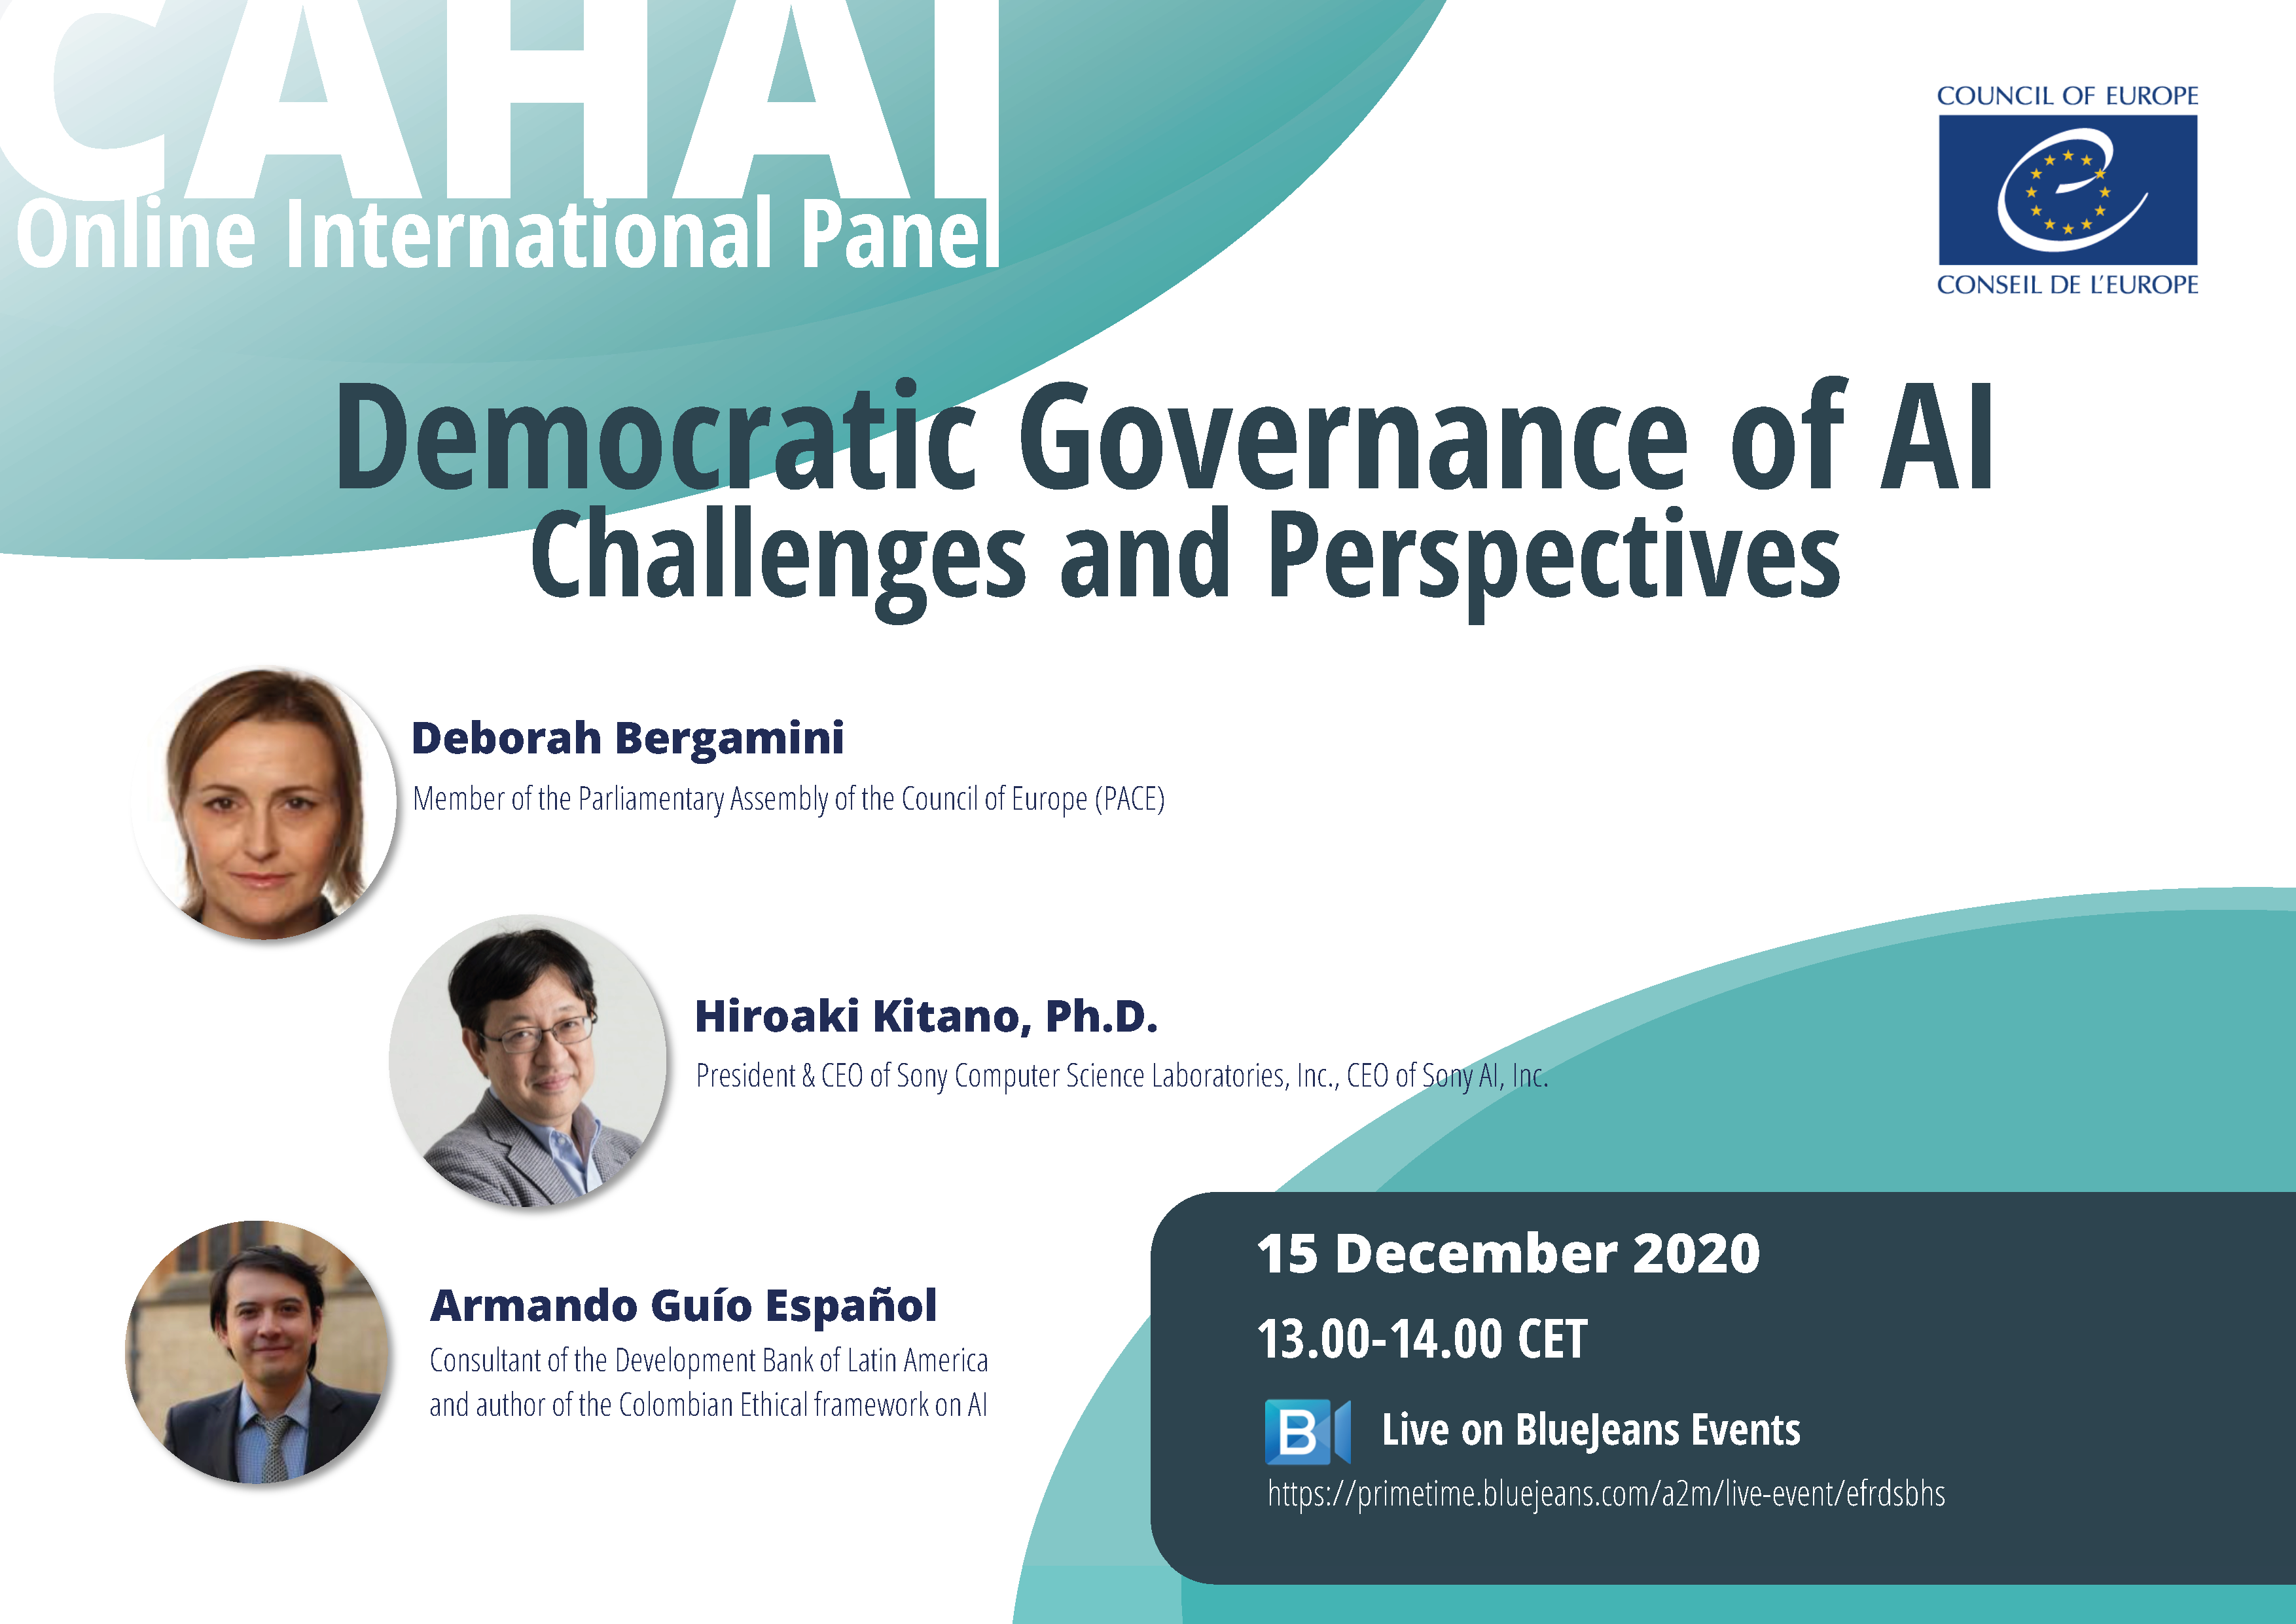 Democratic governance of AI: challenges and perspectives